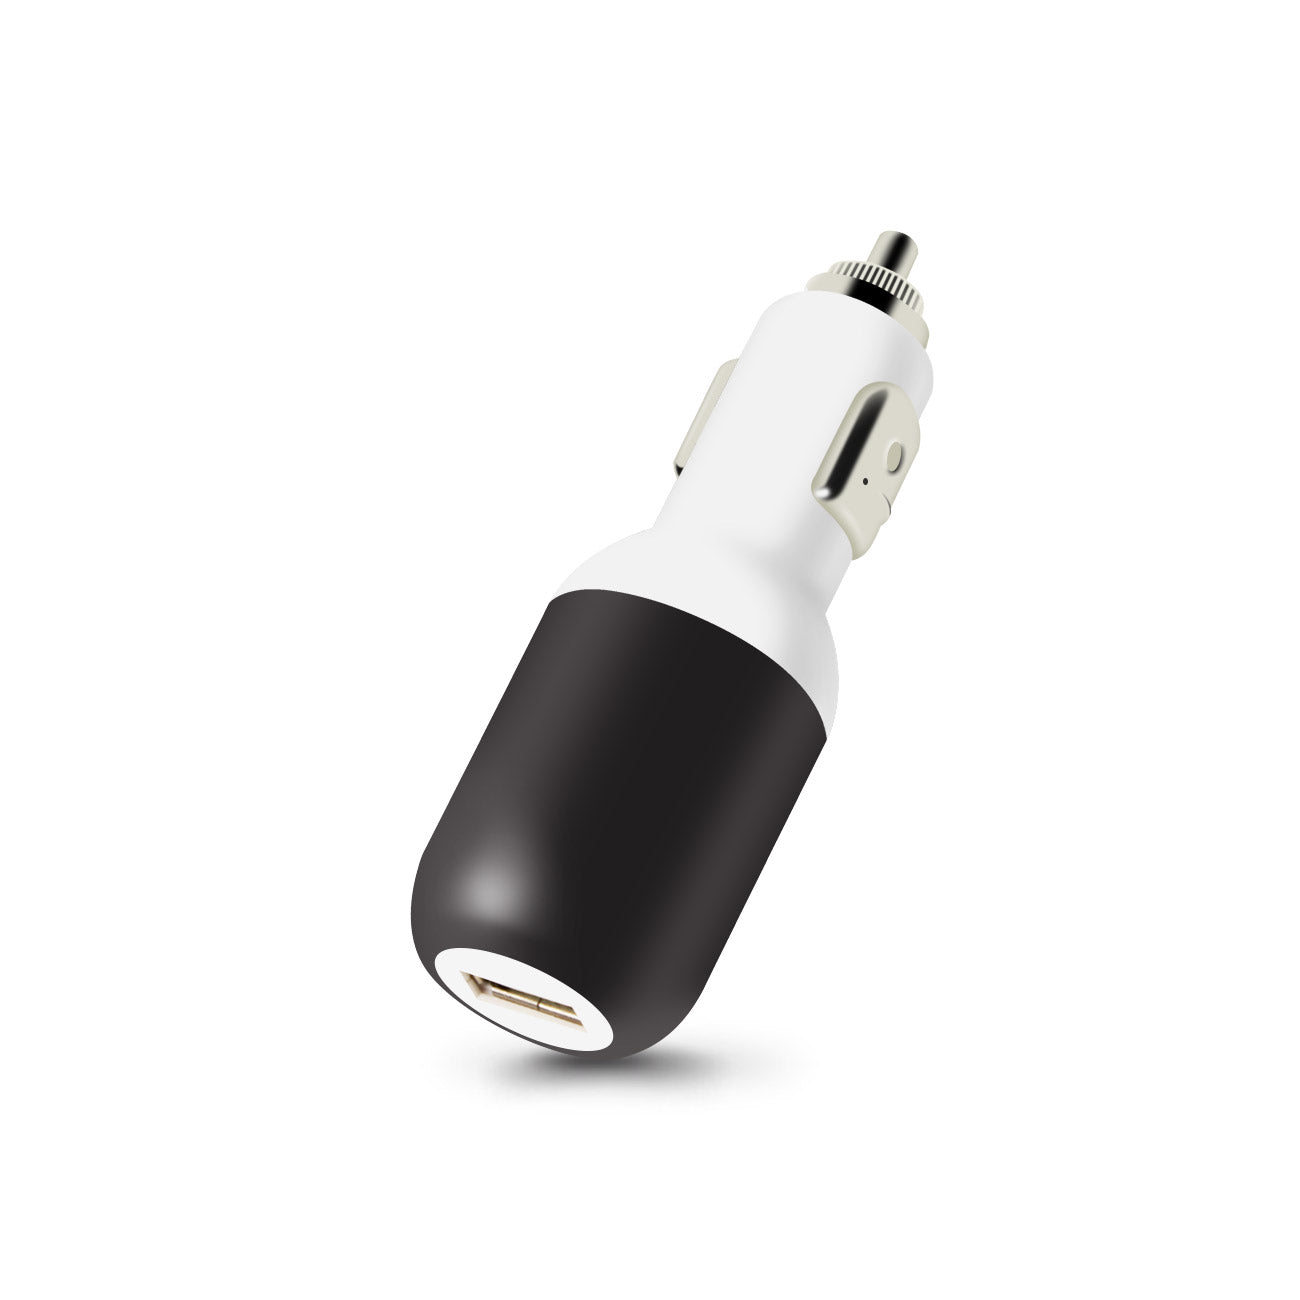 APPLE IPHONE 3G/3GS USB CAR CHARGER -BLACK